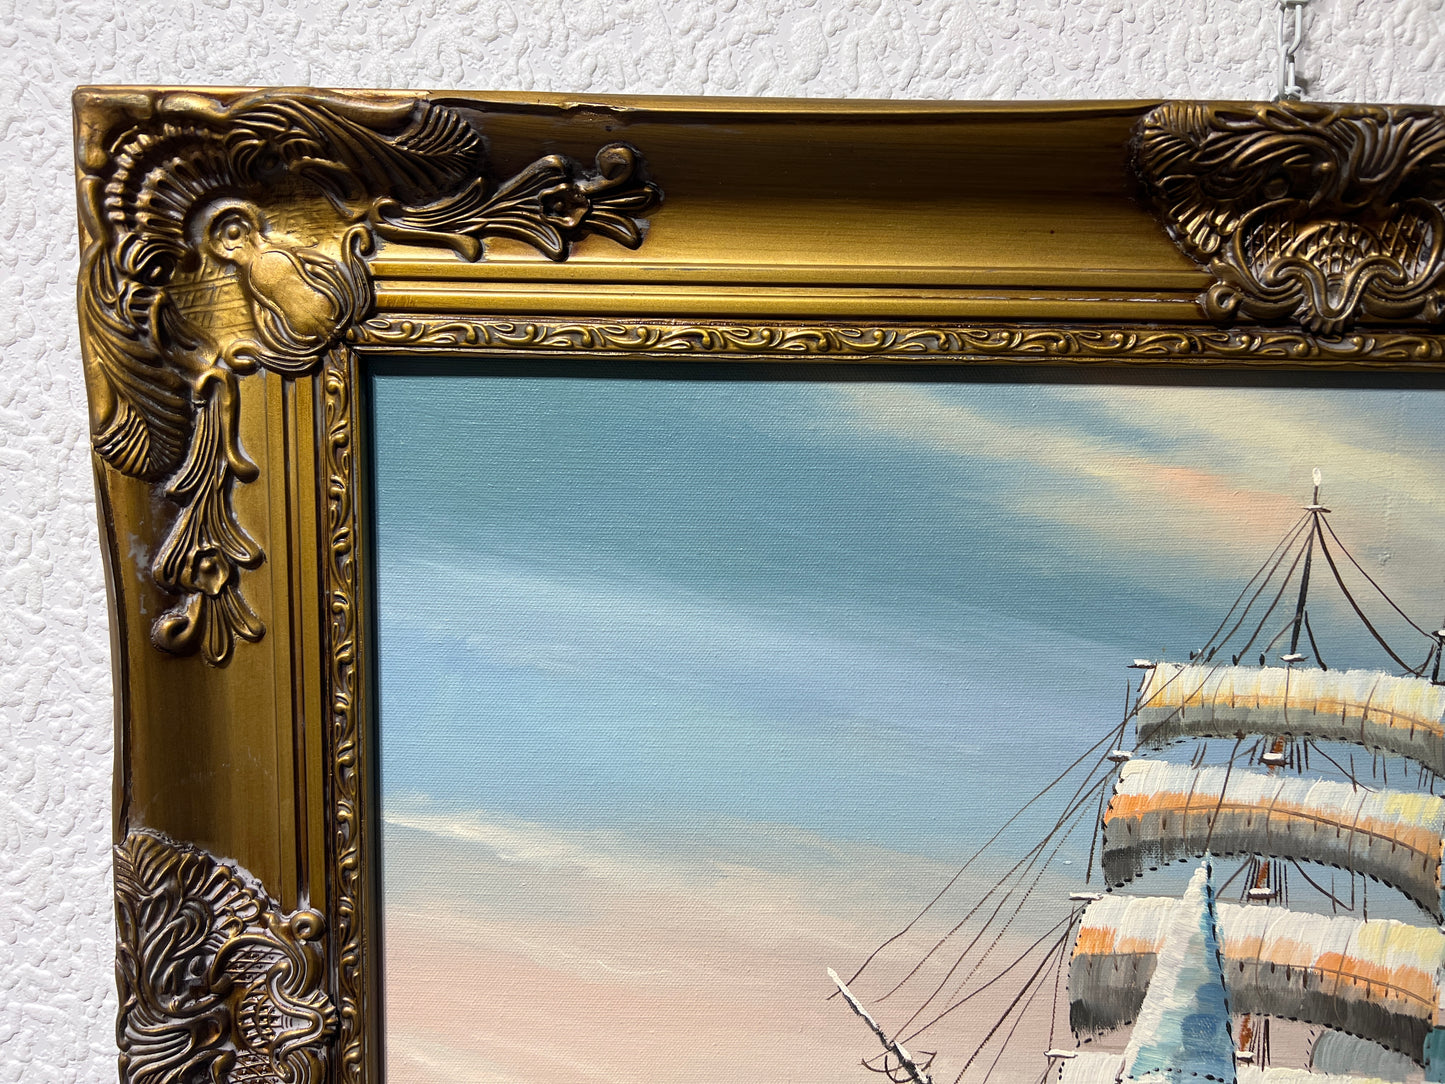 Original Oil painting on canvas, seascape, Sailing Ship, signed, Gold Frame